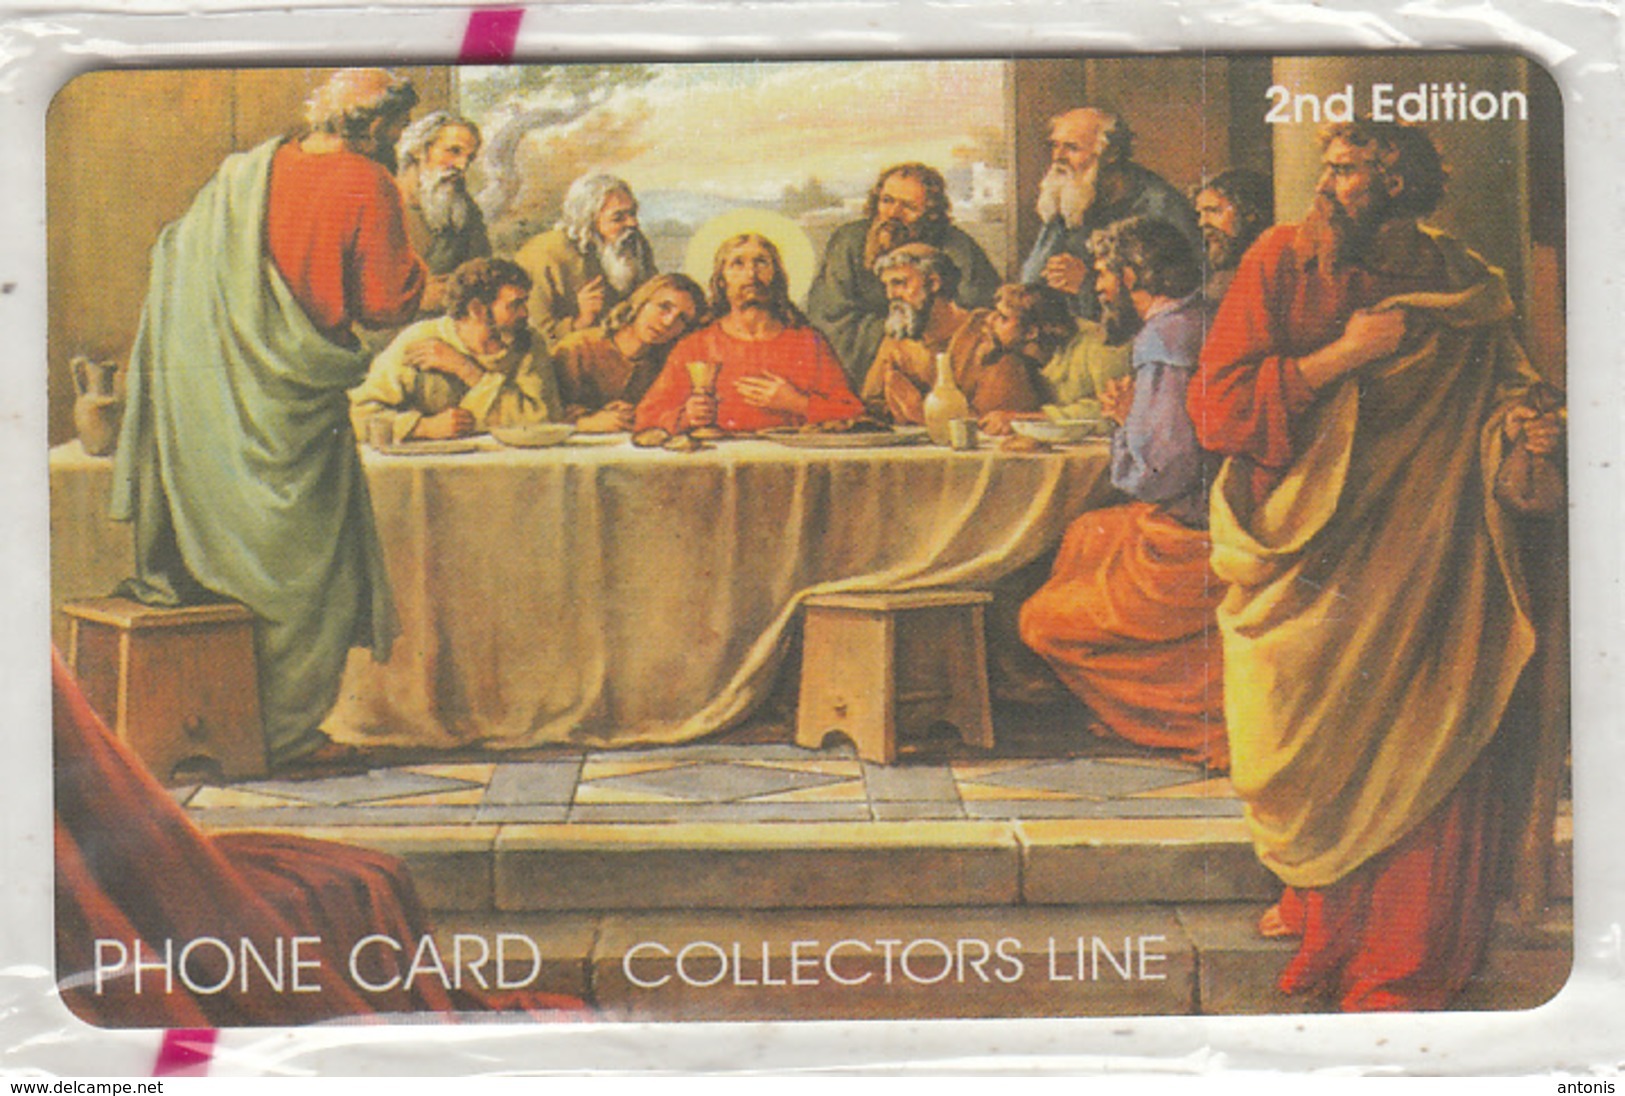 GREECE - Painting/Last Supper, Collectors Line Prepaid Card, Tirage 1000, Mint - Grecia